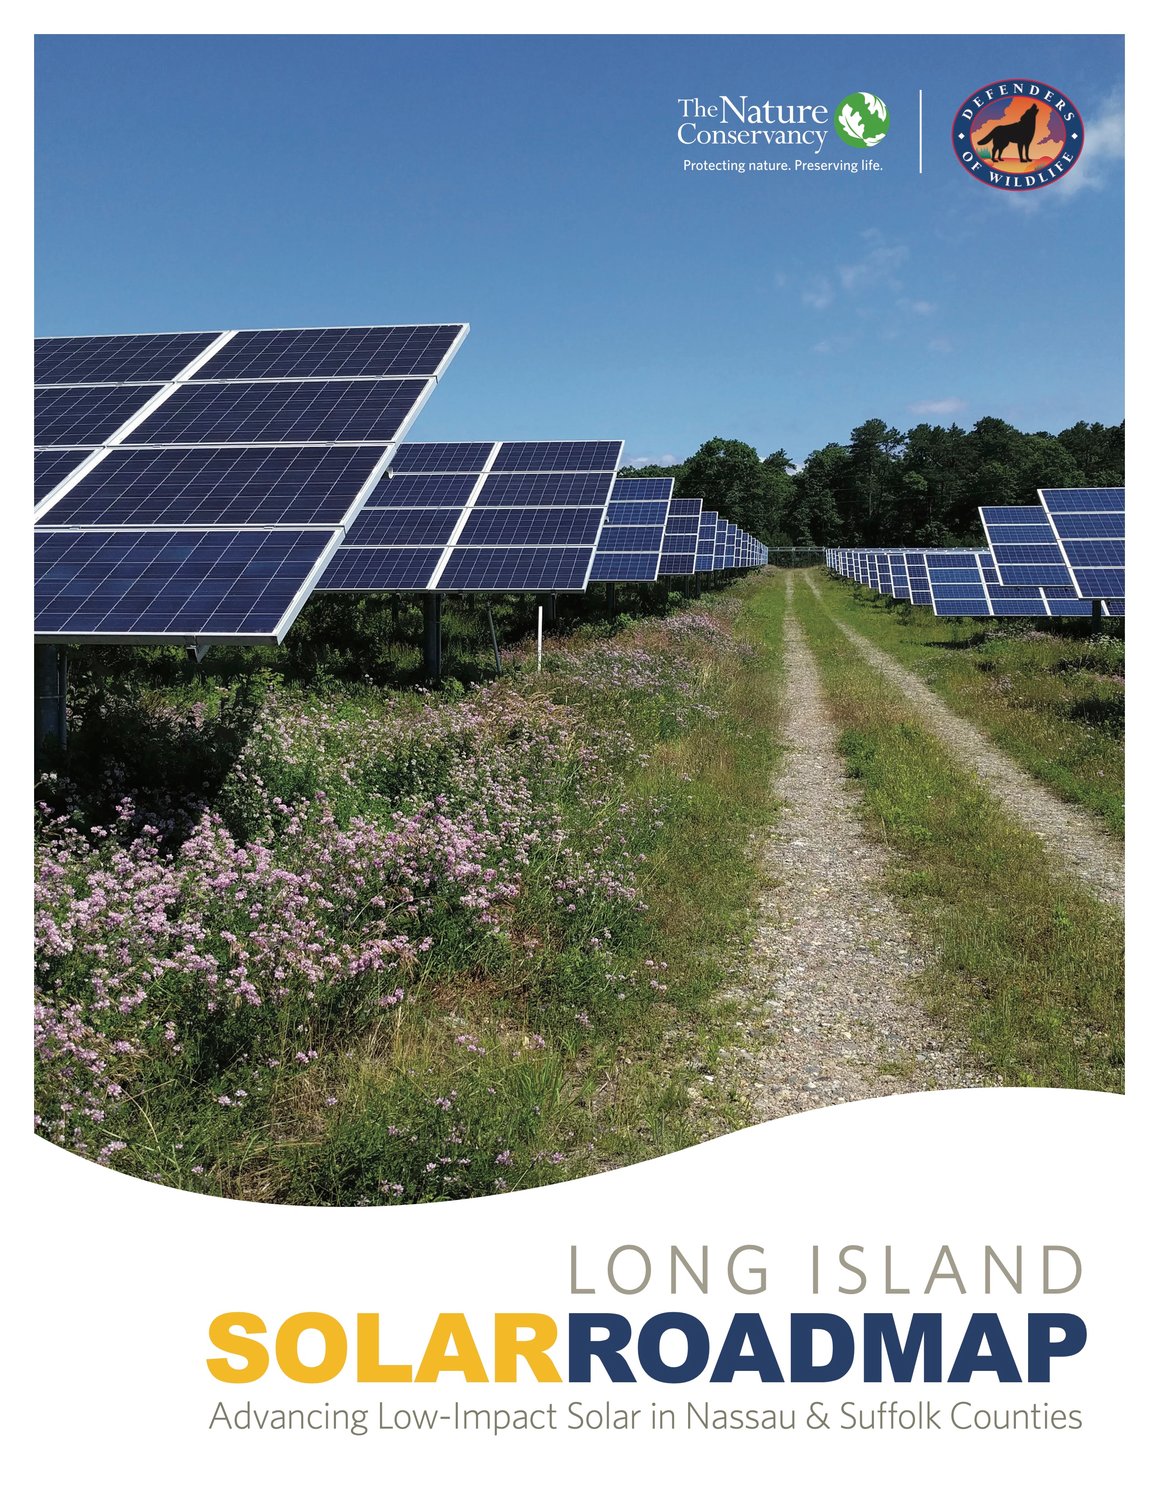 The Nature Conservancy and Defenders of Wildlife just issued their recent March report, “The Long Island Solar Roadmap” and interactive online map, with specific areas where Long Island can produce more solar electricity than the region uses.